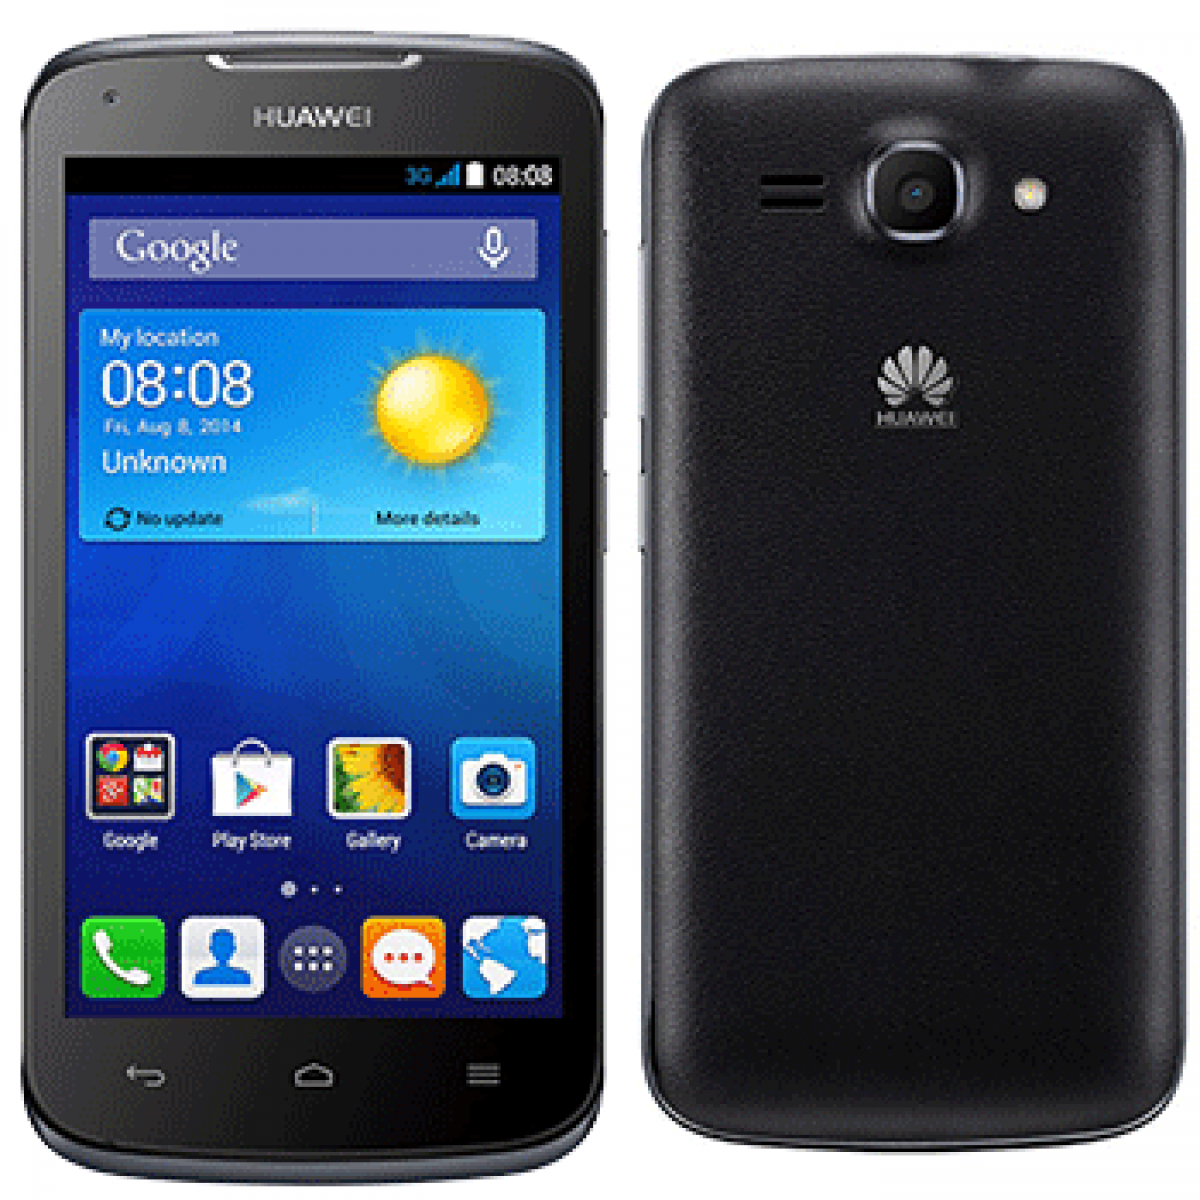  Huawei  Ascend Y520  Price In Pakistan Specs Feature Camera Ram